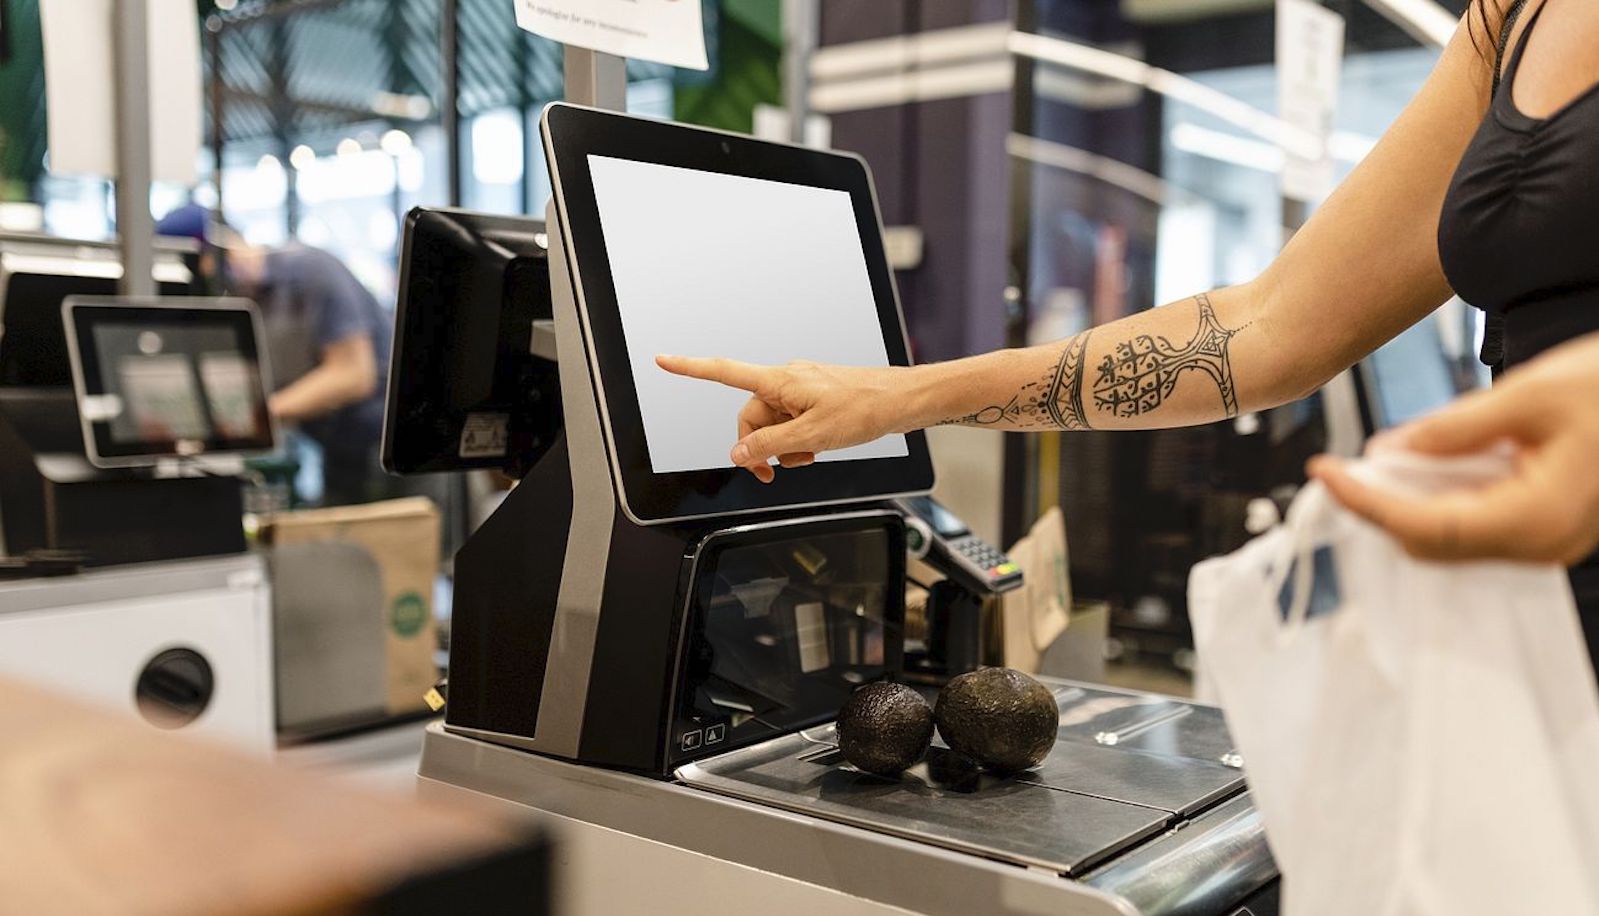 A woman touching the screen at a self checkout stand in a store with two avocados sitting on the scale